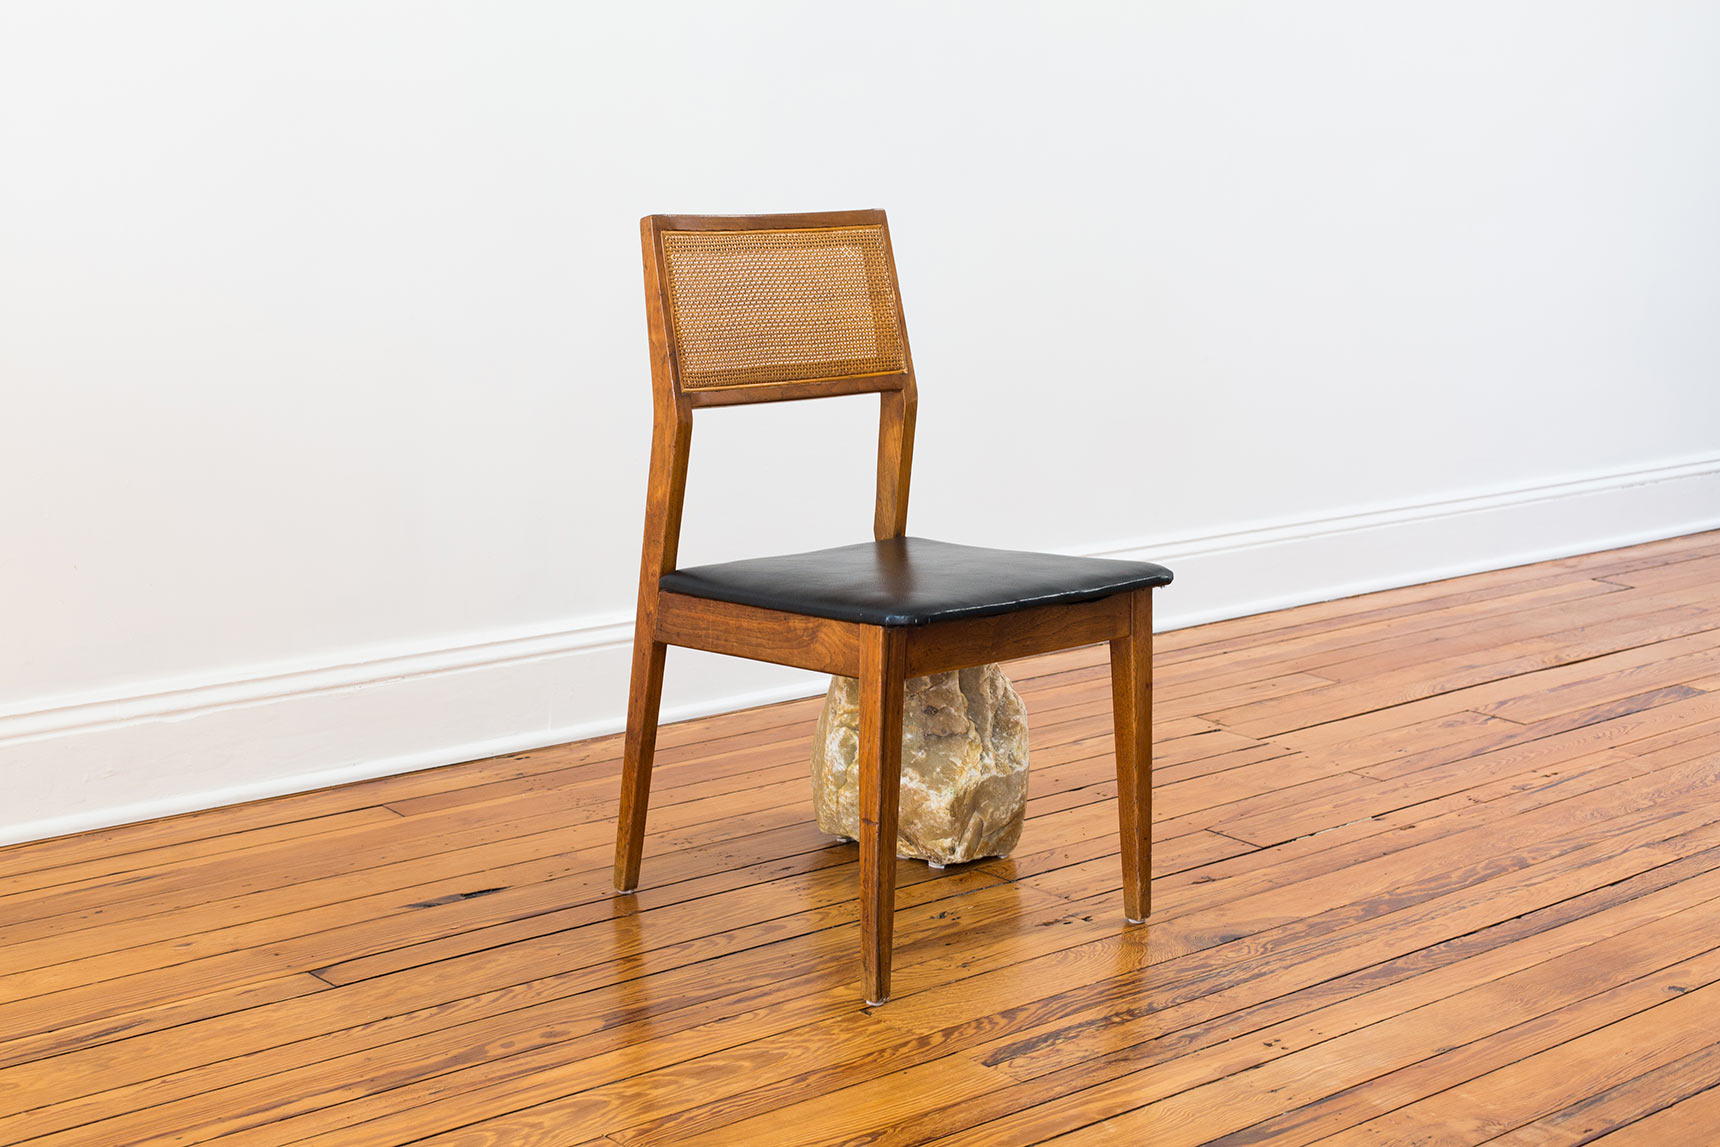 Codependent Chair, a chair with one broken-off leg supported by a large rock